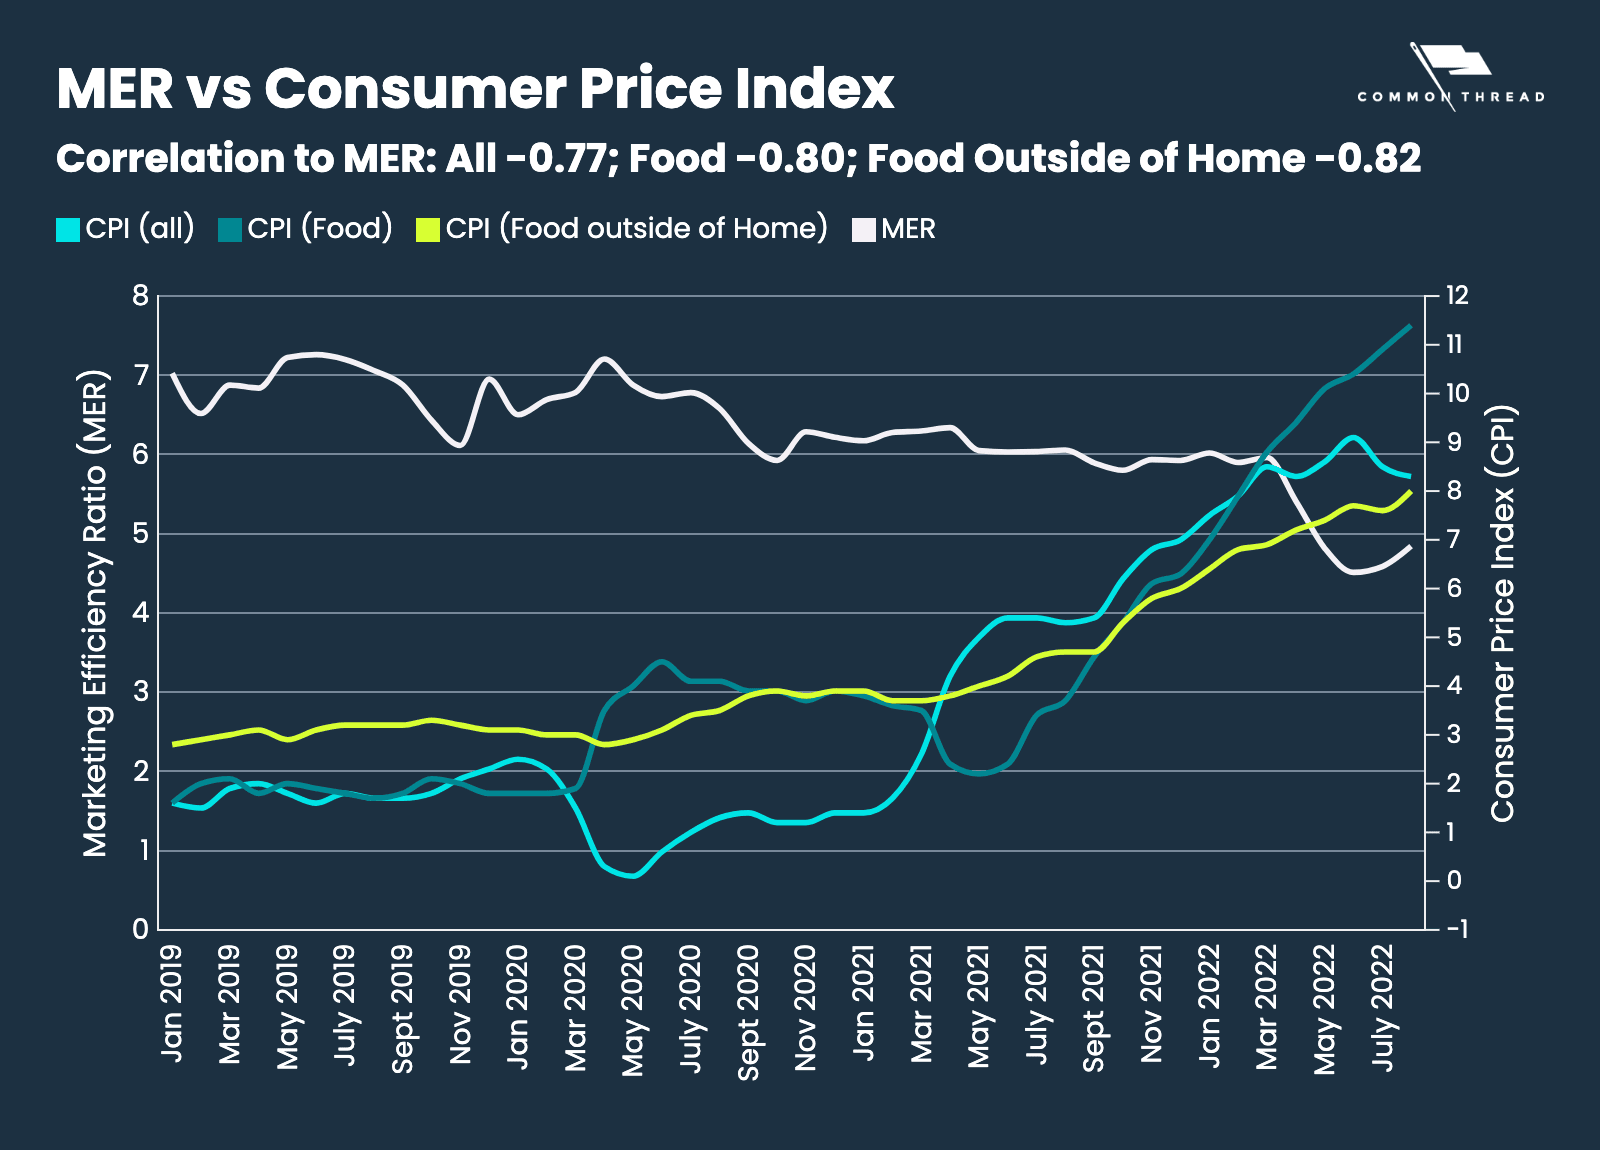 MER vs Consumer Price Index; Correlation to MER: All -0.77, Food -0.80, Food Outside of Home -0.82